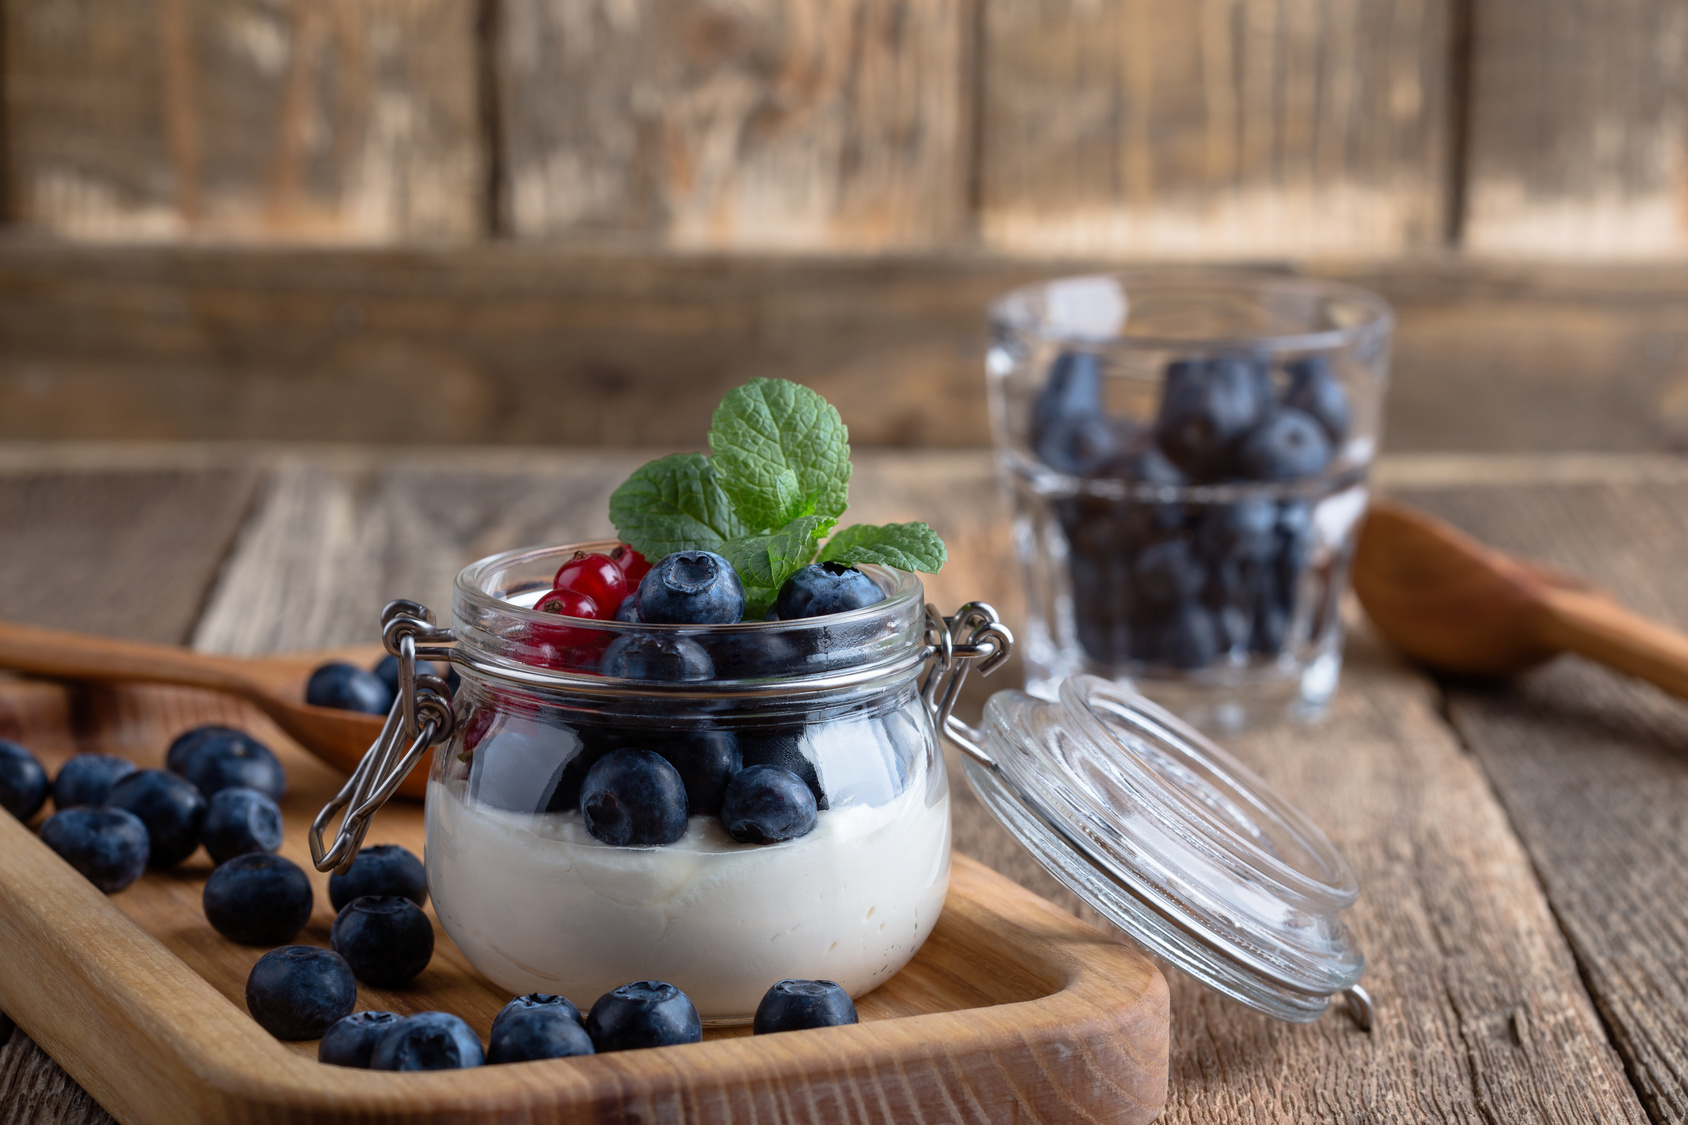 Cheesecake creme parfaits with blueberries and red currant berries served in jar, delicious summer no-bake dessert on rustic wooden table ready to eat